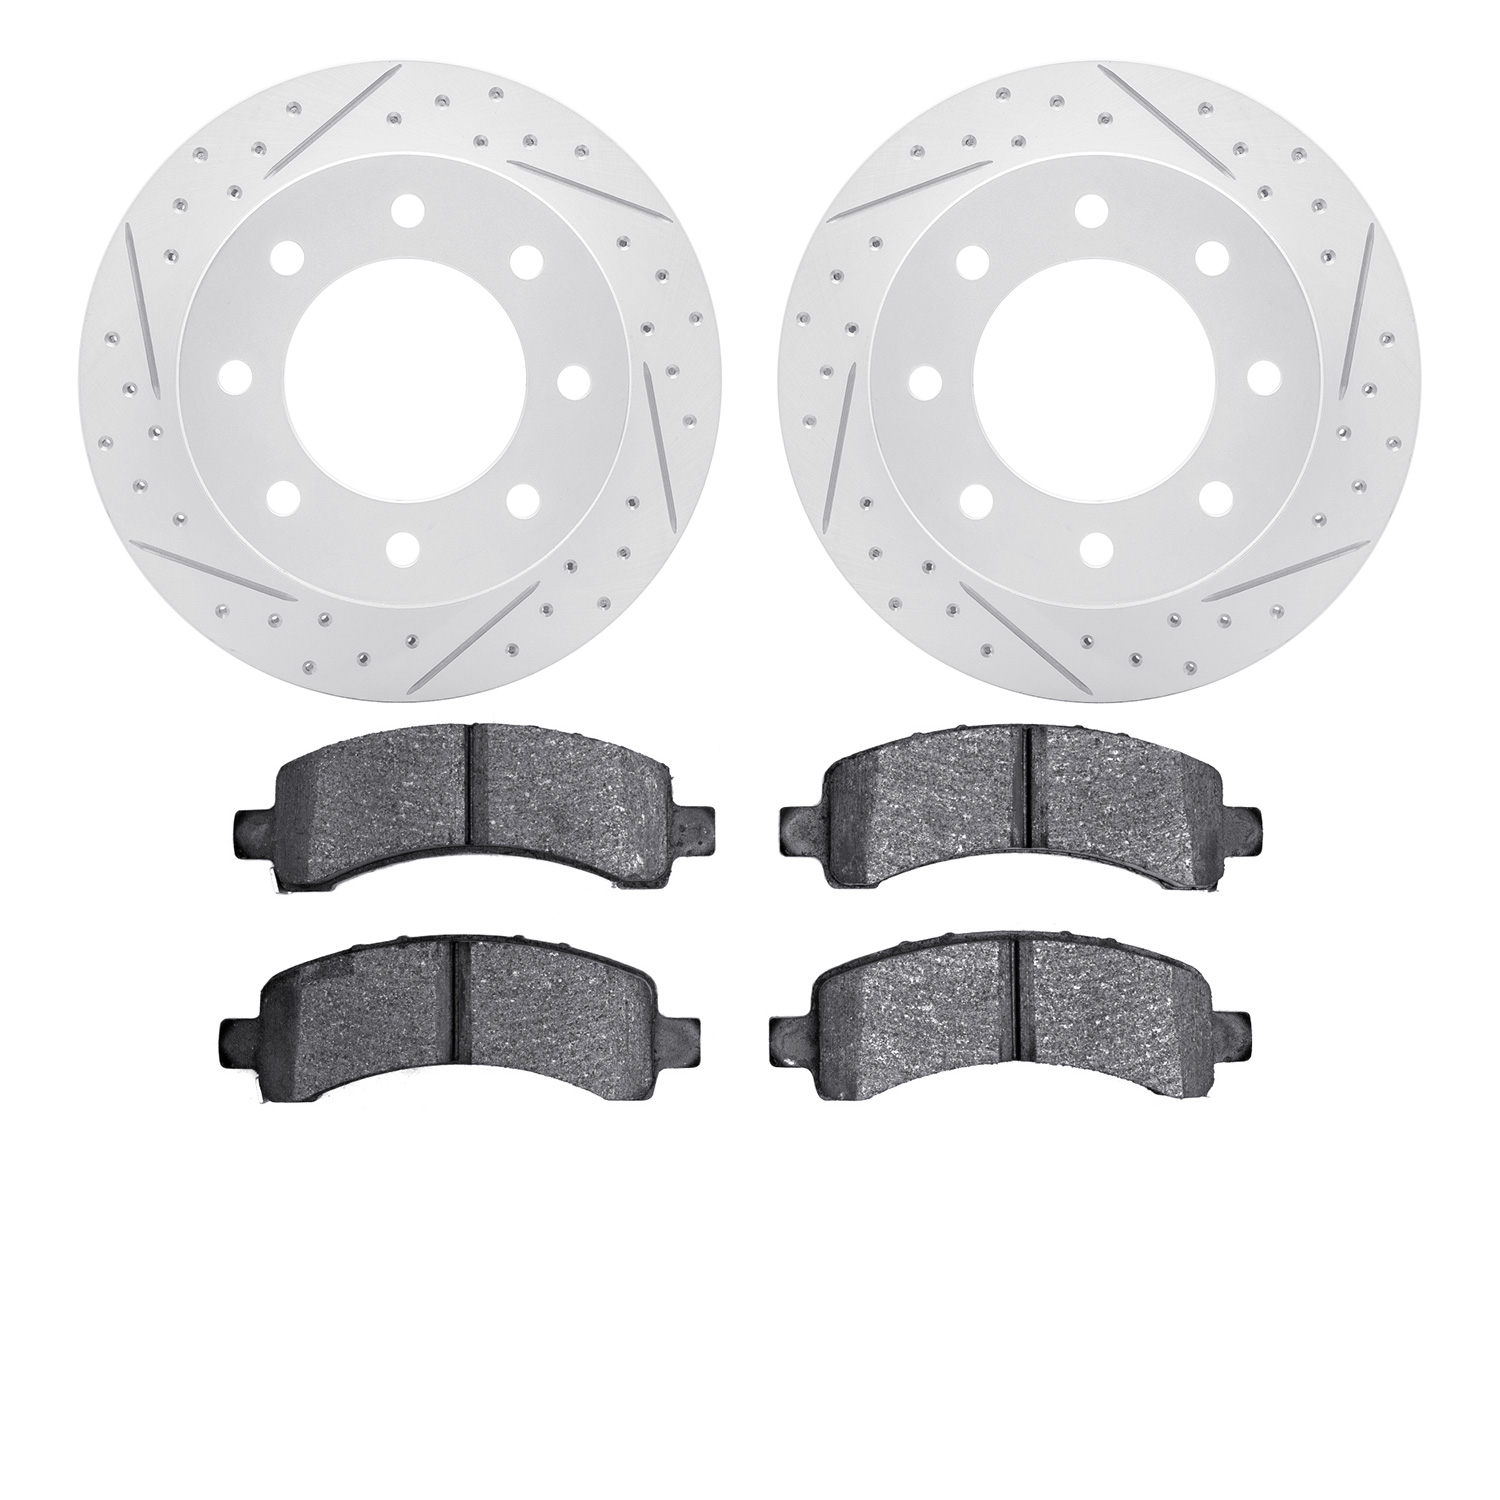 2502-48025 Geoperformance Drilled/Slotted Rotors w/5000 Advanced Brake Pads Kit, 2003-2017 GM, Position: Rear